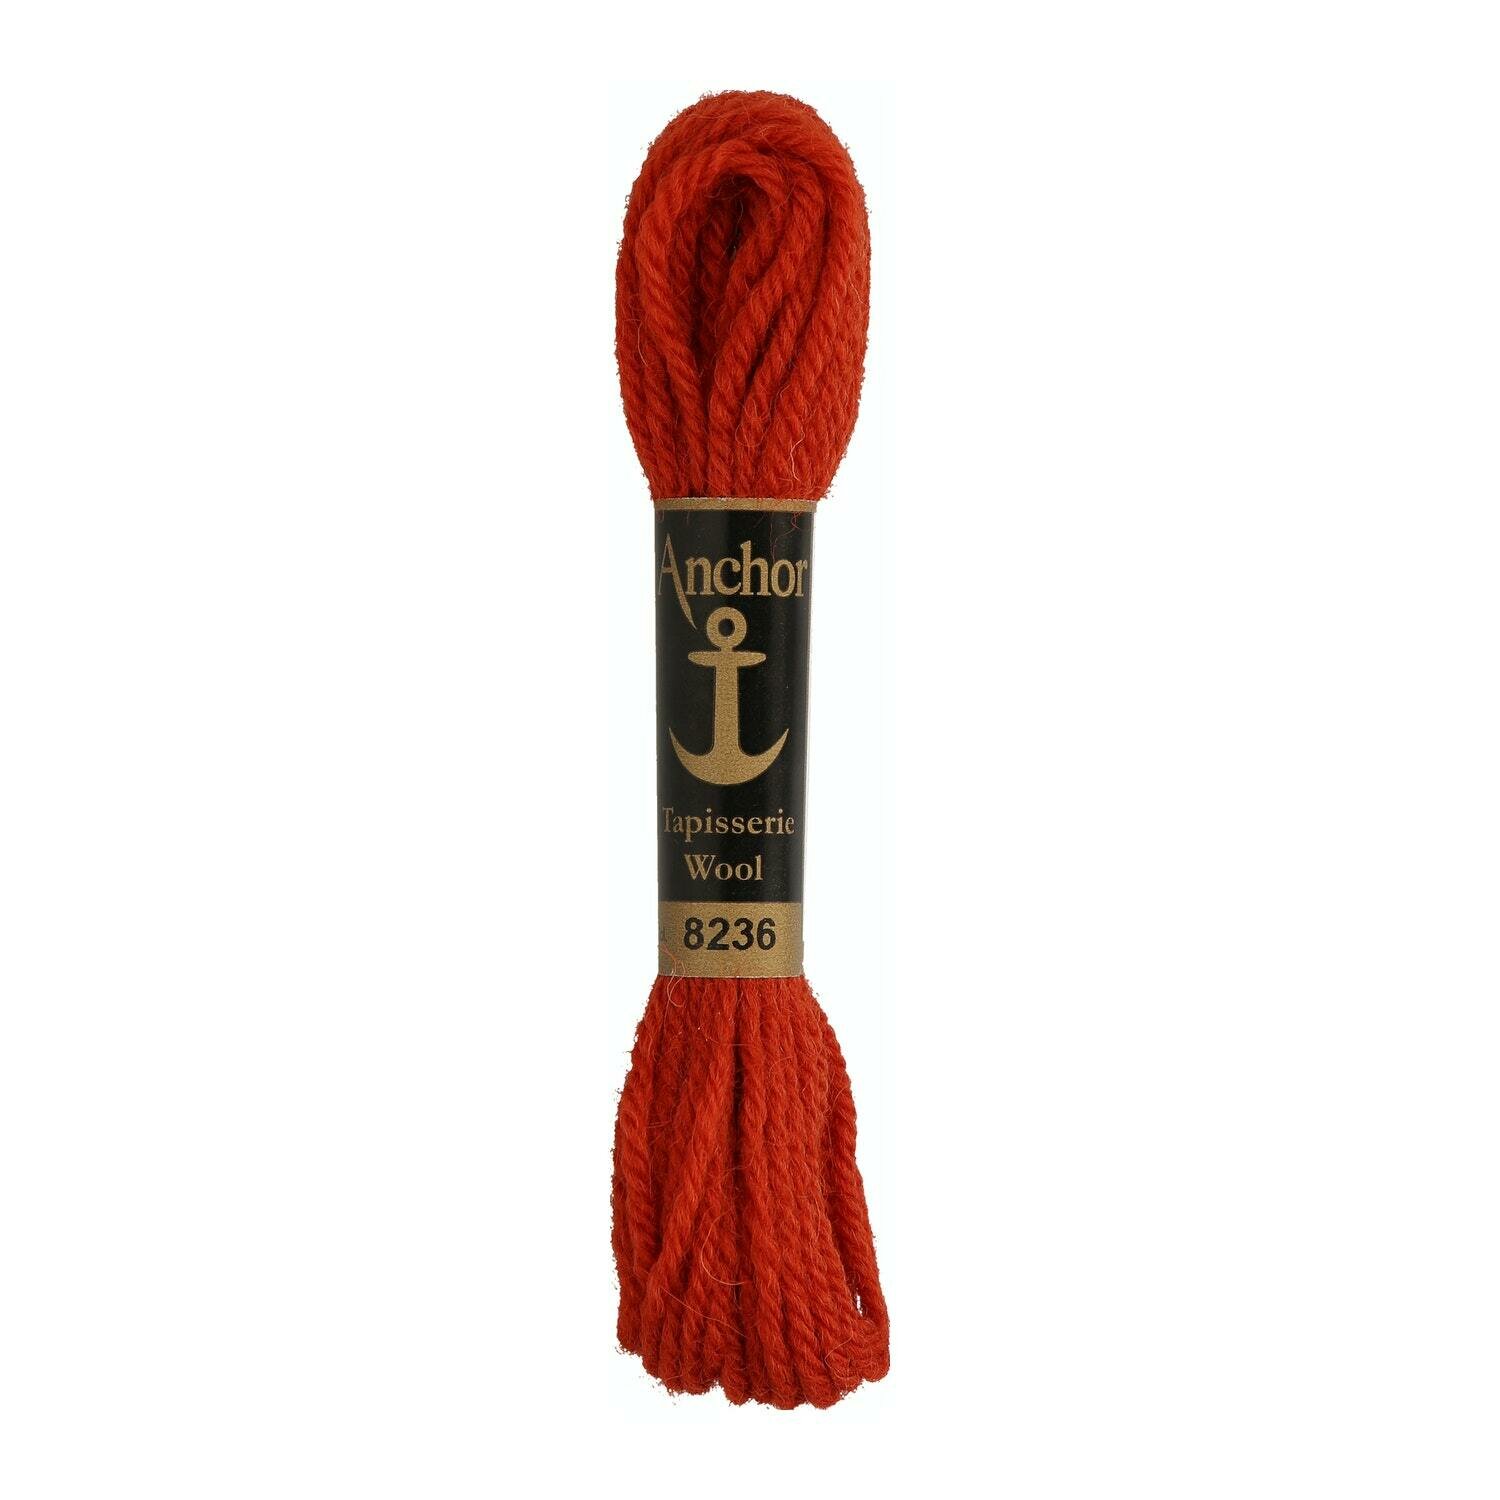 Anchor Tapisserie Wool # 08236, Makeup: Box of 10 Skeins (10m)